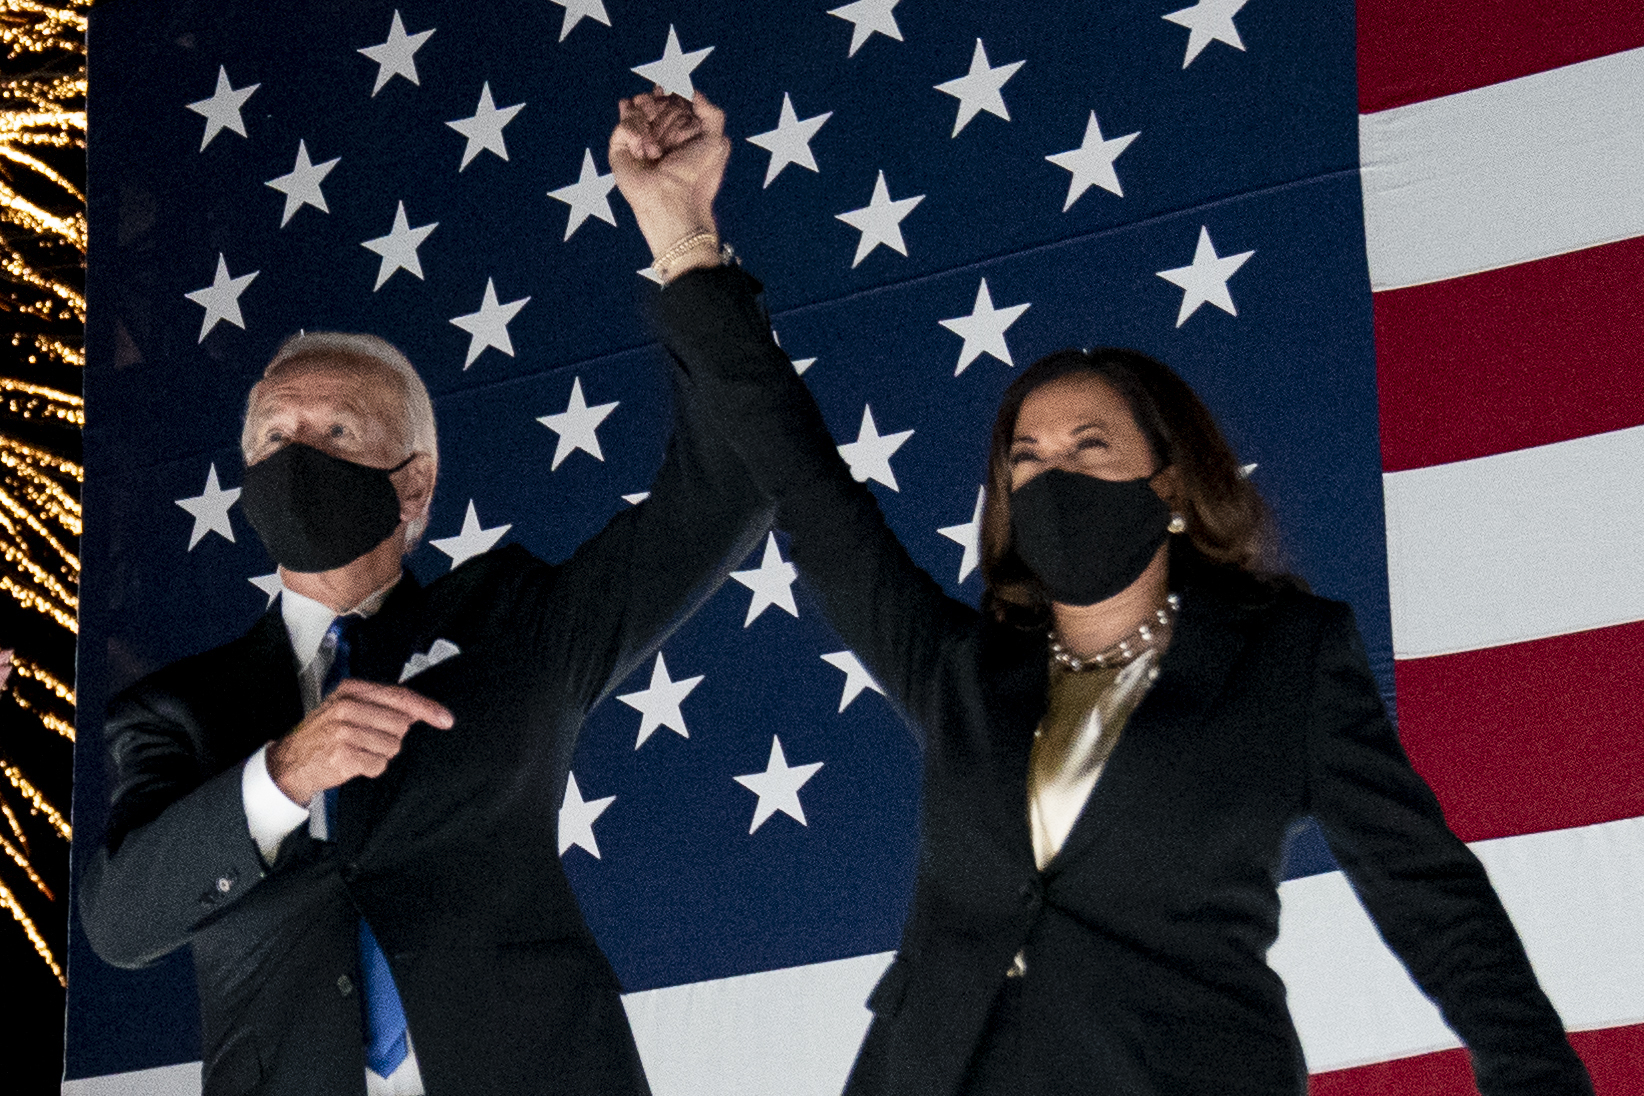 PHOTO: Democratic presidential candidate and former Vice President Joe Biden and his vice presidential running mate Senator Kamala Harris appear together on the fourth night of the Democratic National Convention in Wilmington, Del., Aug. 20, 2020.